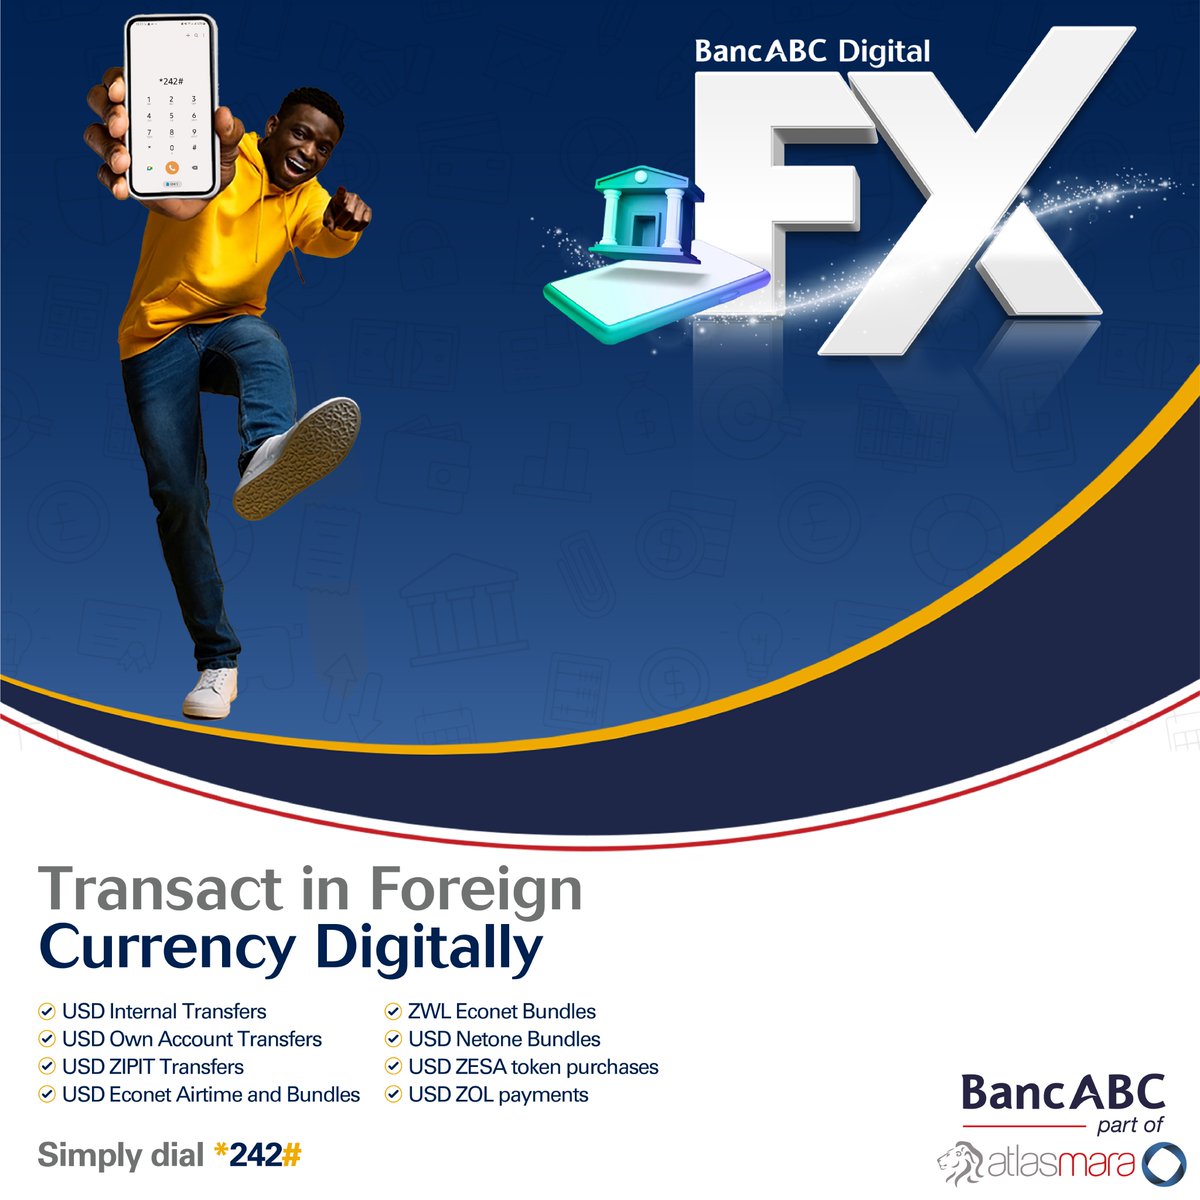 Dial *242# and conduct foreign currency transactions digitally📲 ✅ USD Internal Transfers ✅ USD Own Account Transfers ✅ USD ZIPIT Transfers ✅ USD Econet Airtime & Bundles ✅ USD Netone Bundles ✅ USD ZESA Token Purchases ✅ USD Liquid Payments #BancABCDigitalFX